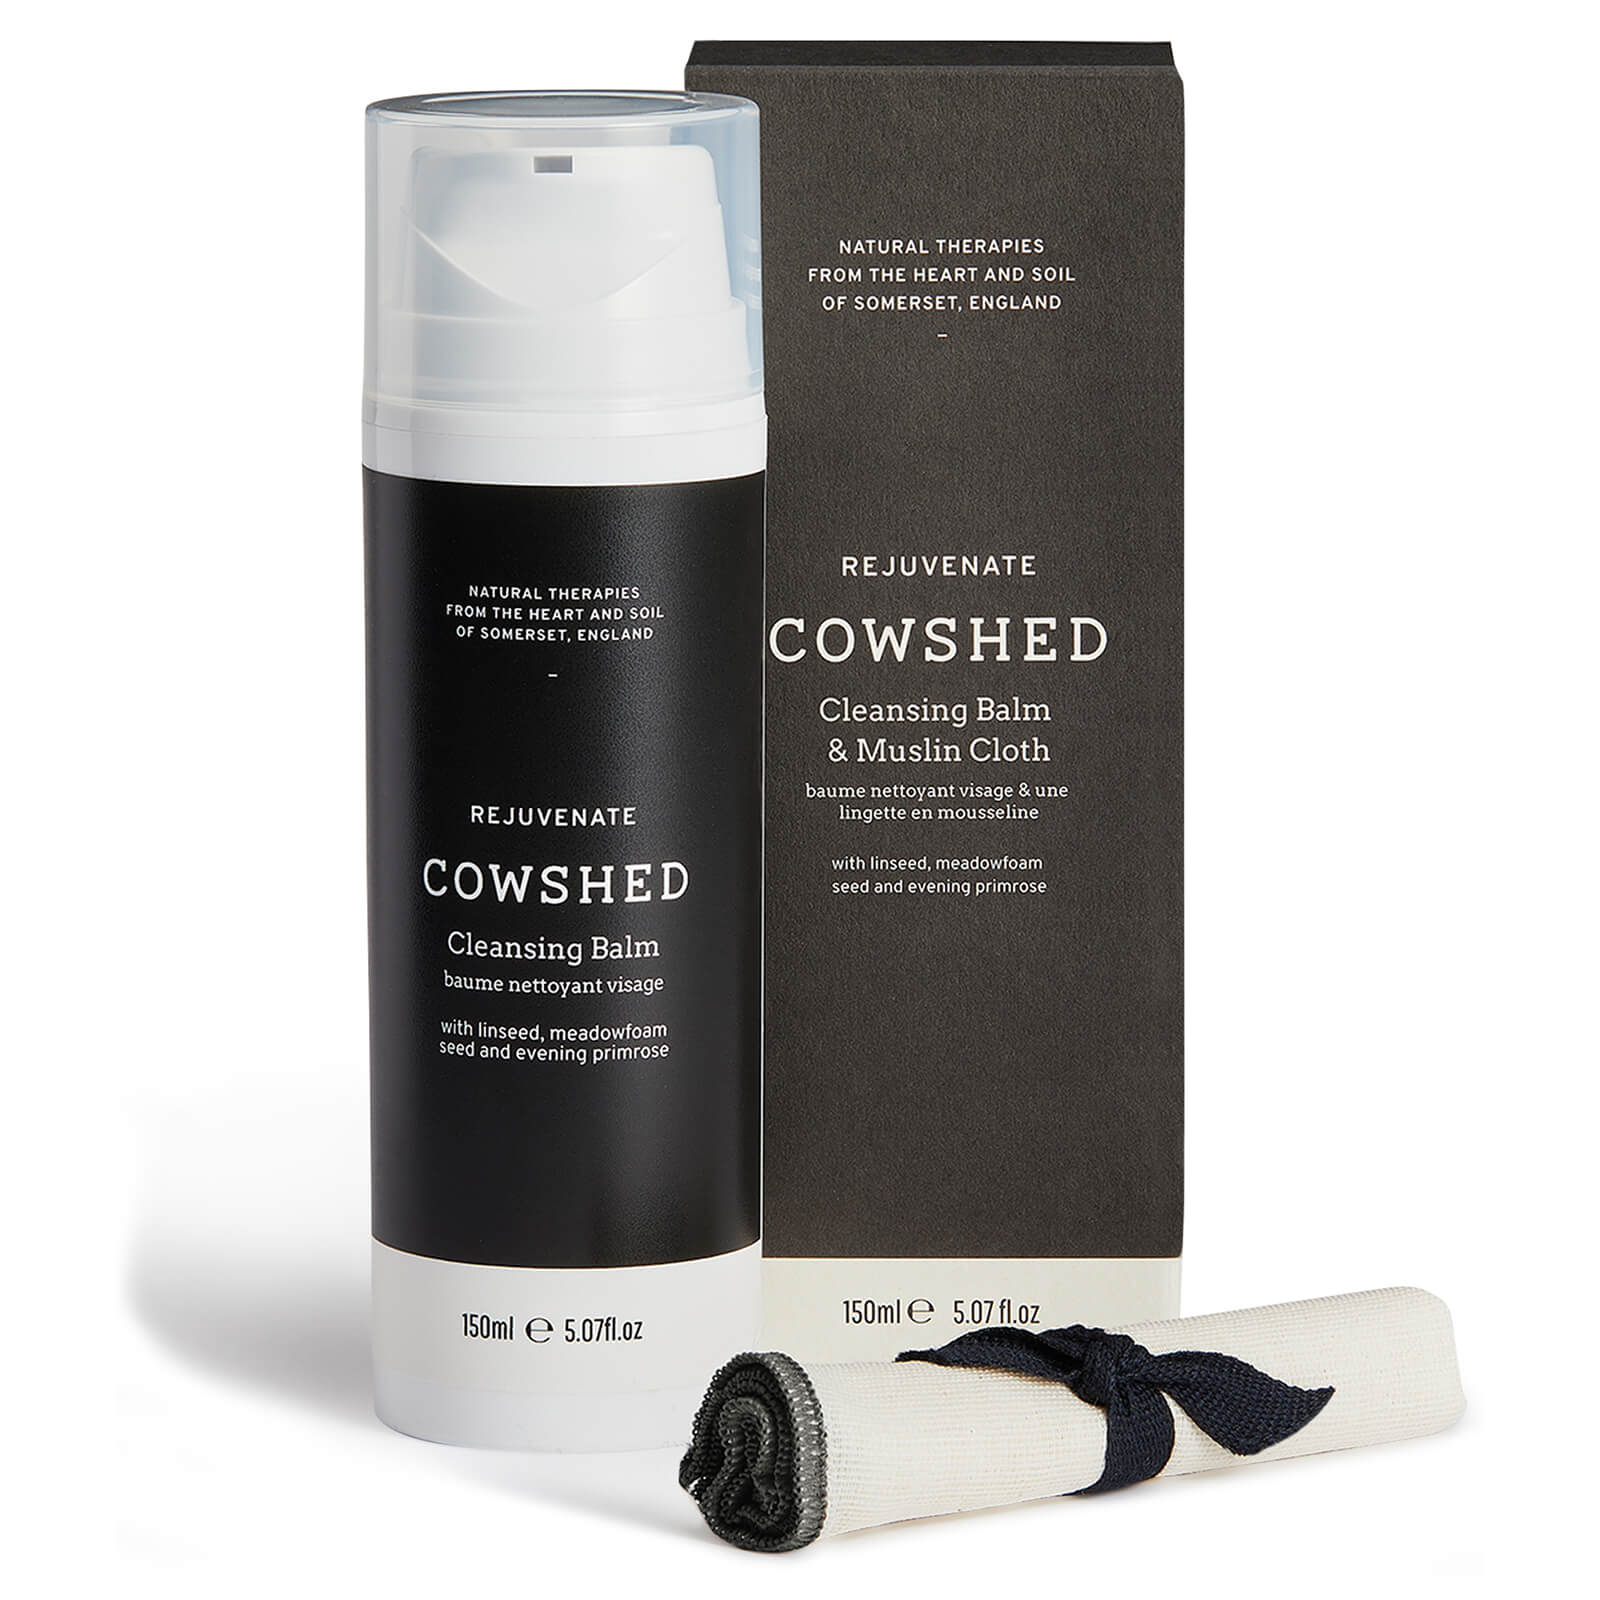 Image of Cowshed Cleansing Balm with Cloth 150g